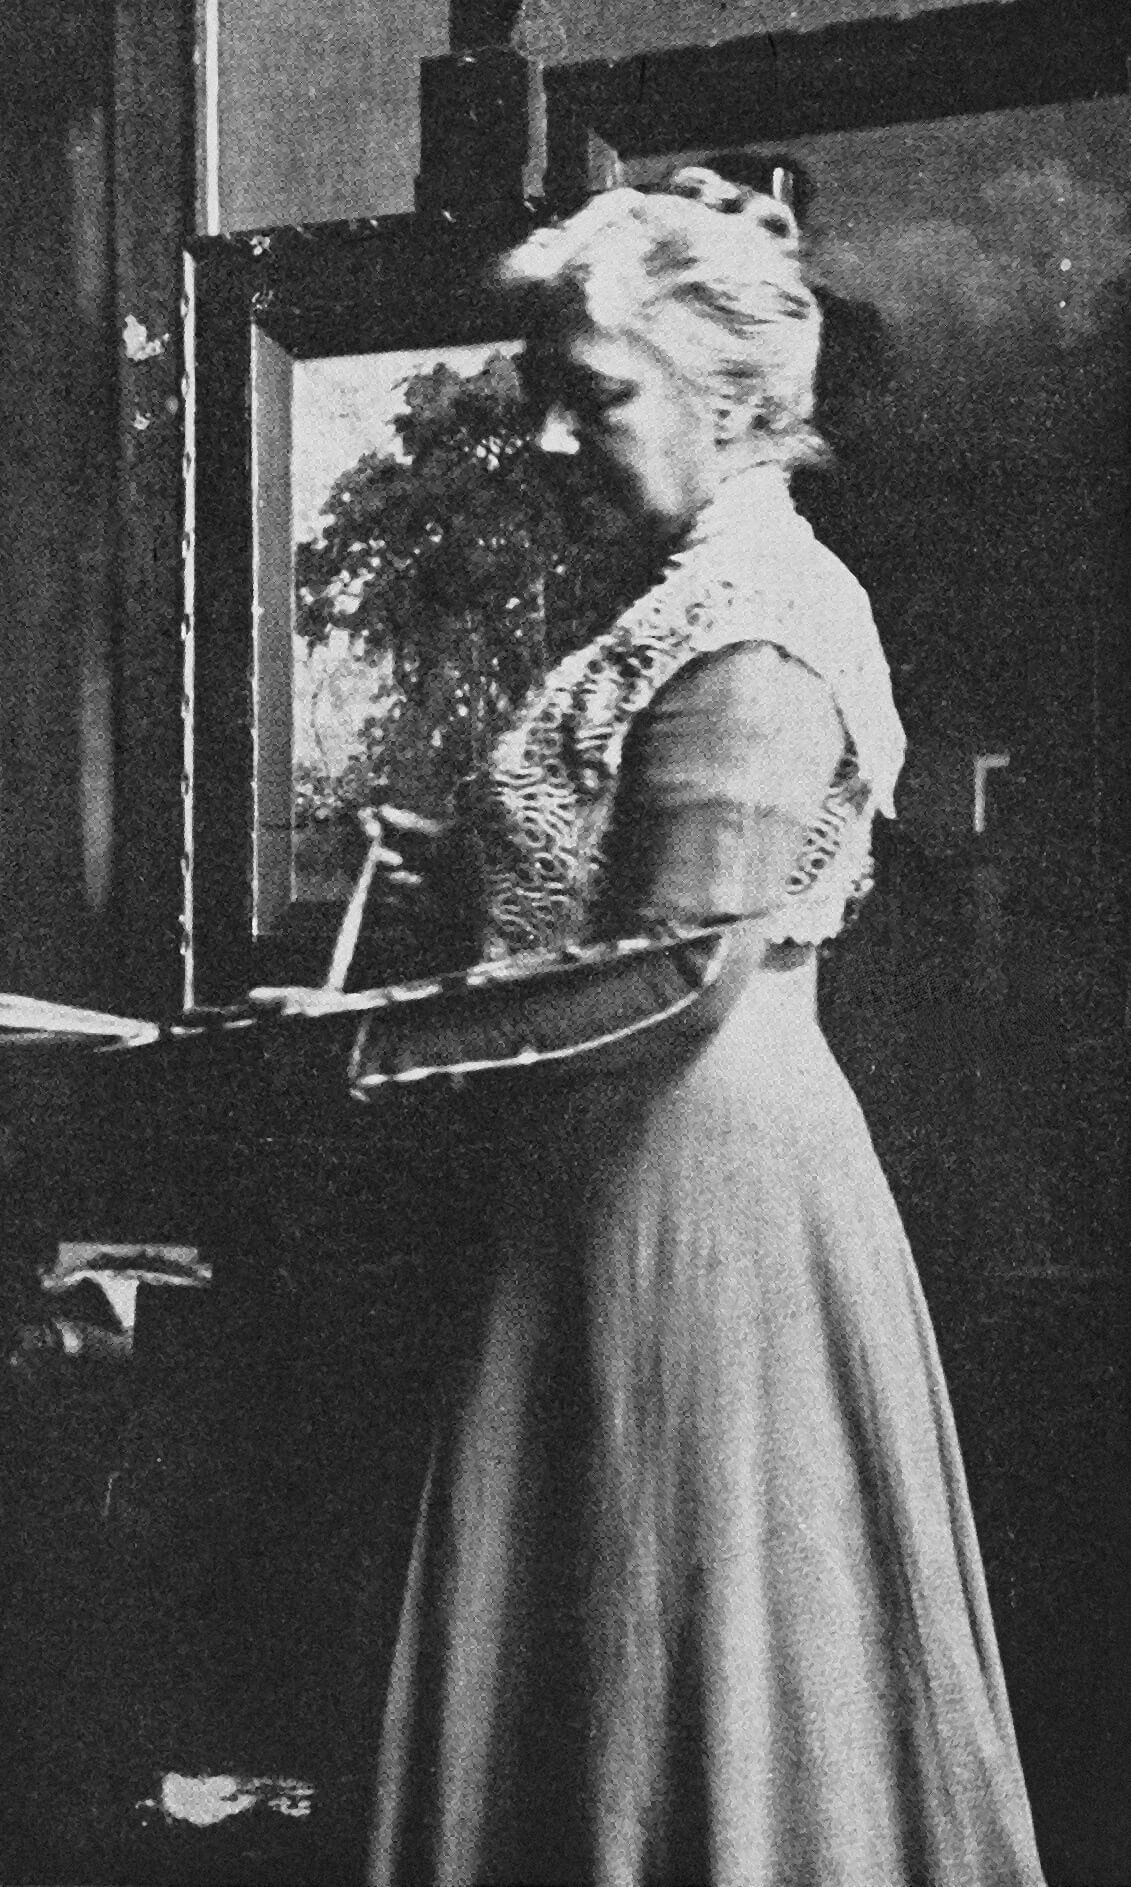 Mary Hiester Reid in her studio with painter's palette, date unknown